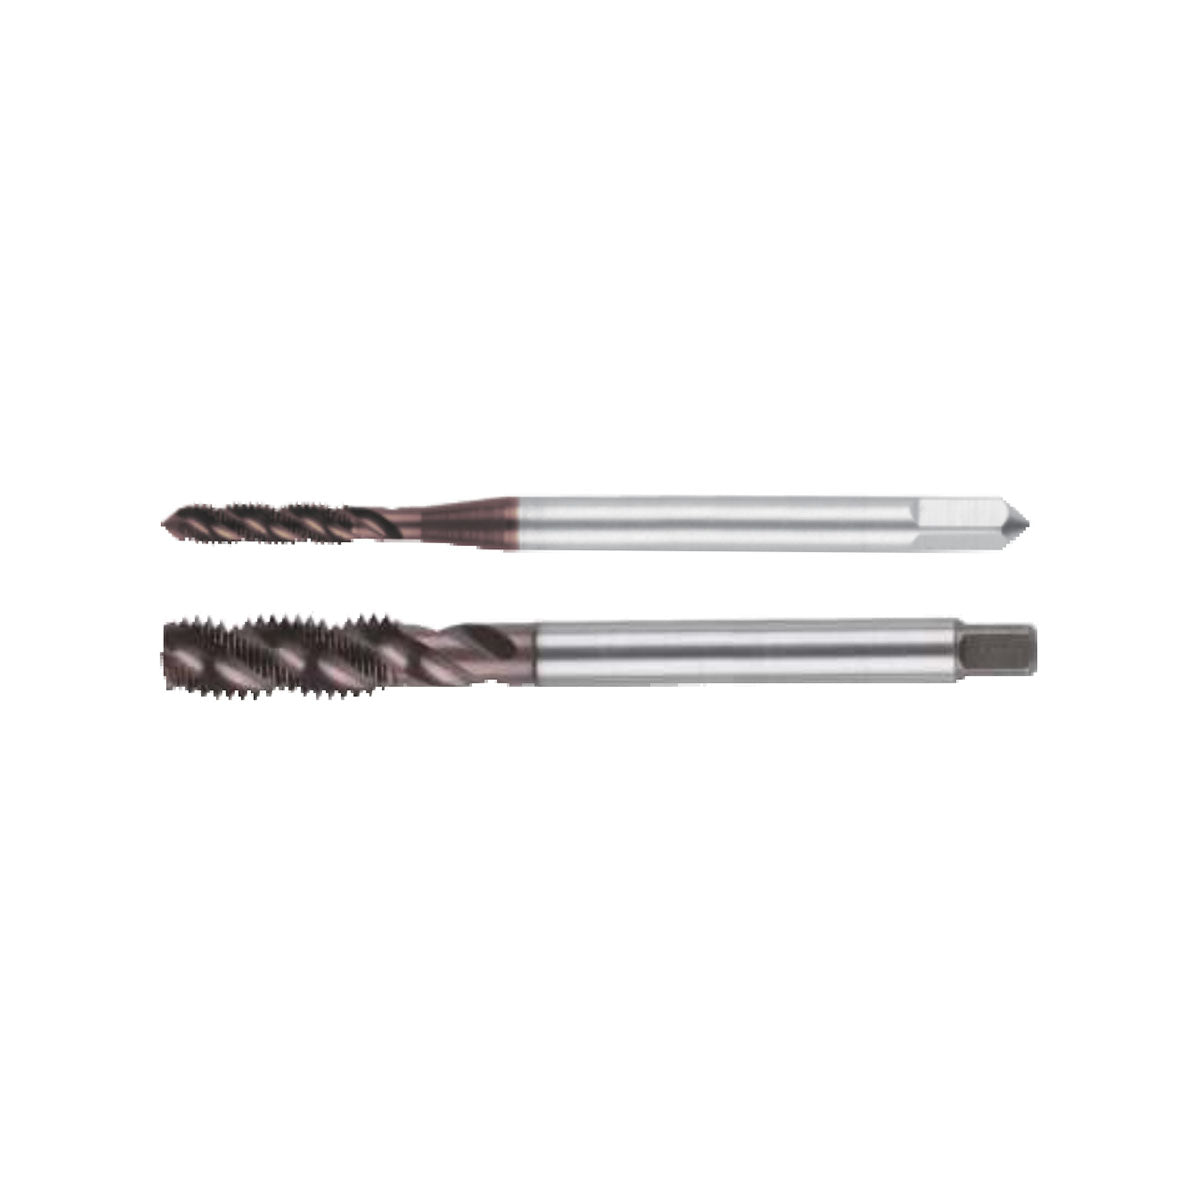 L-SFT (NO.4~3/8-24UNF~40UNC) MSU44080 SFT Spiral pointed taps with long shank - Makotools Industrial Supply Tools for Metal Cutting